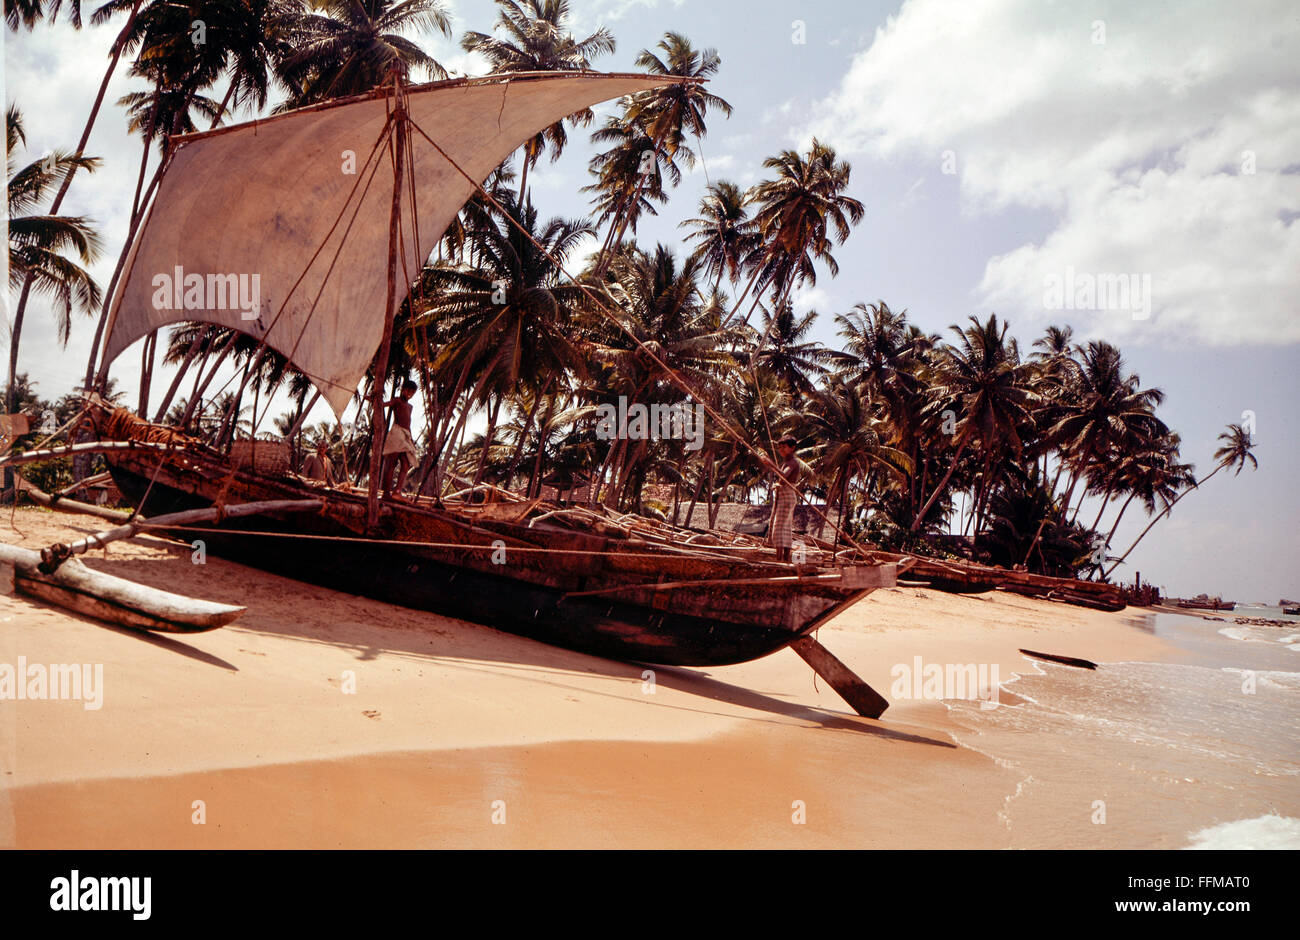 geography / travel, Sri Lanka, Hikkaduwa, beaches, dugout canoe with sails, 1970s, Additional-Rights-Clearences-Not Available Stock Photo